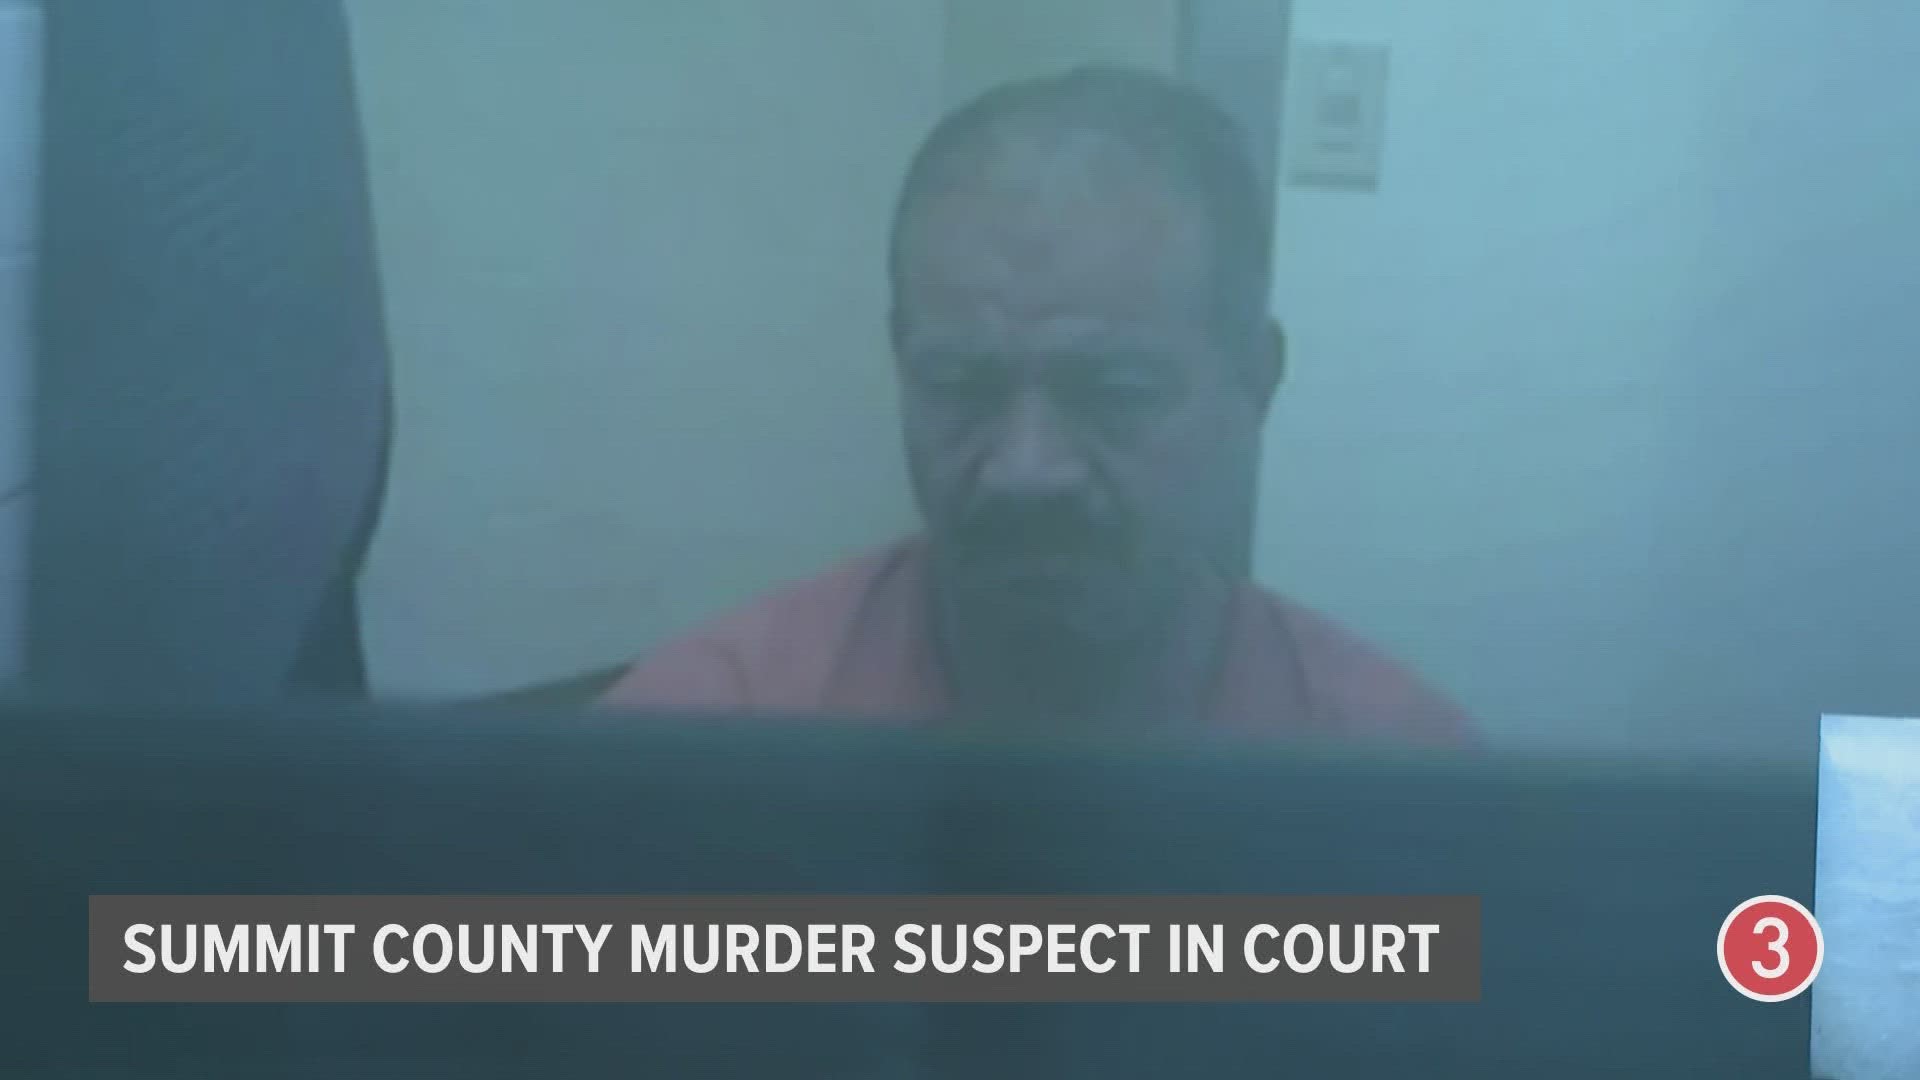 58-year-old Elias Gudino, a murder suspect in Summit County, made his first court appearance in the case Monday morning.